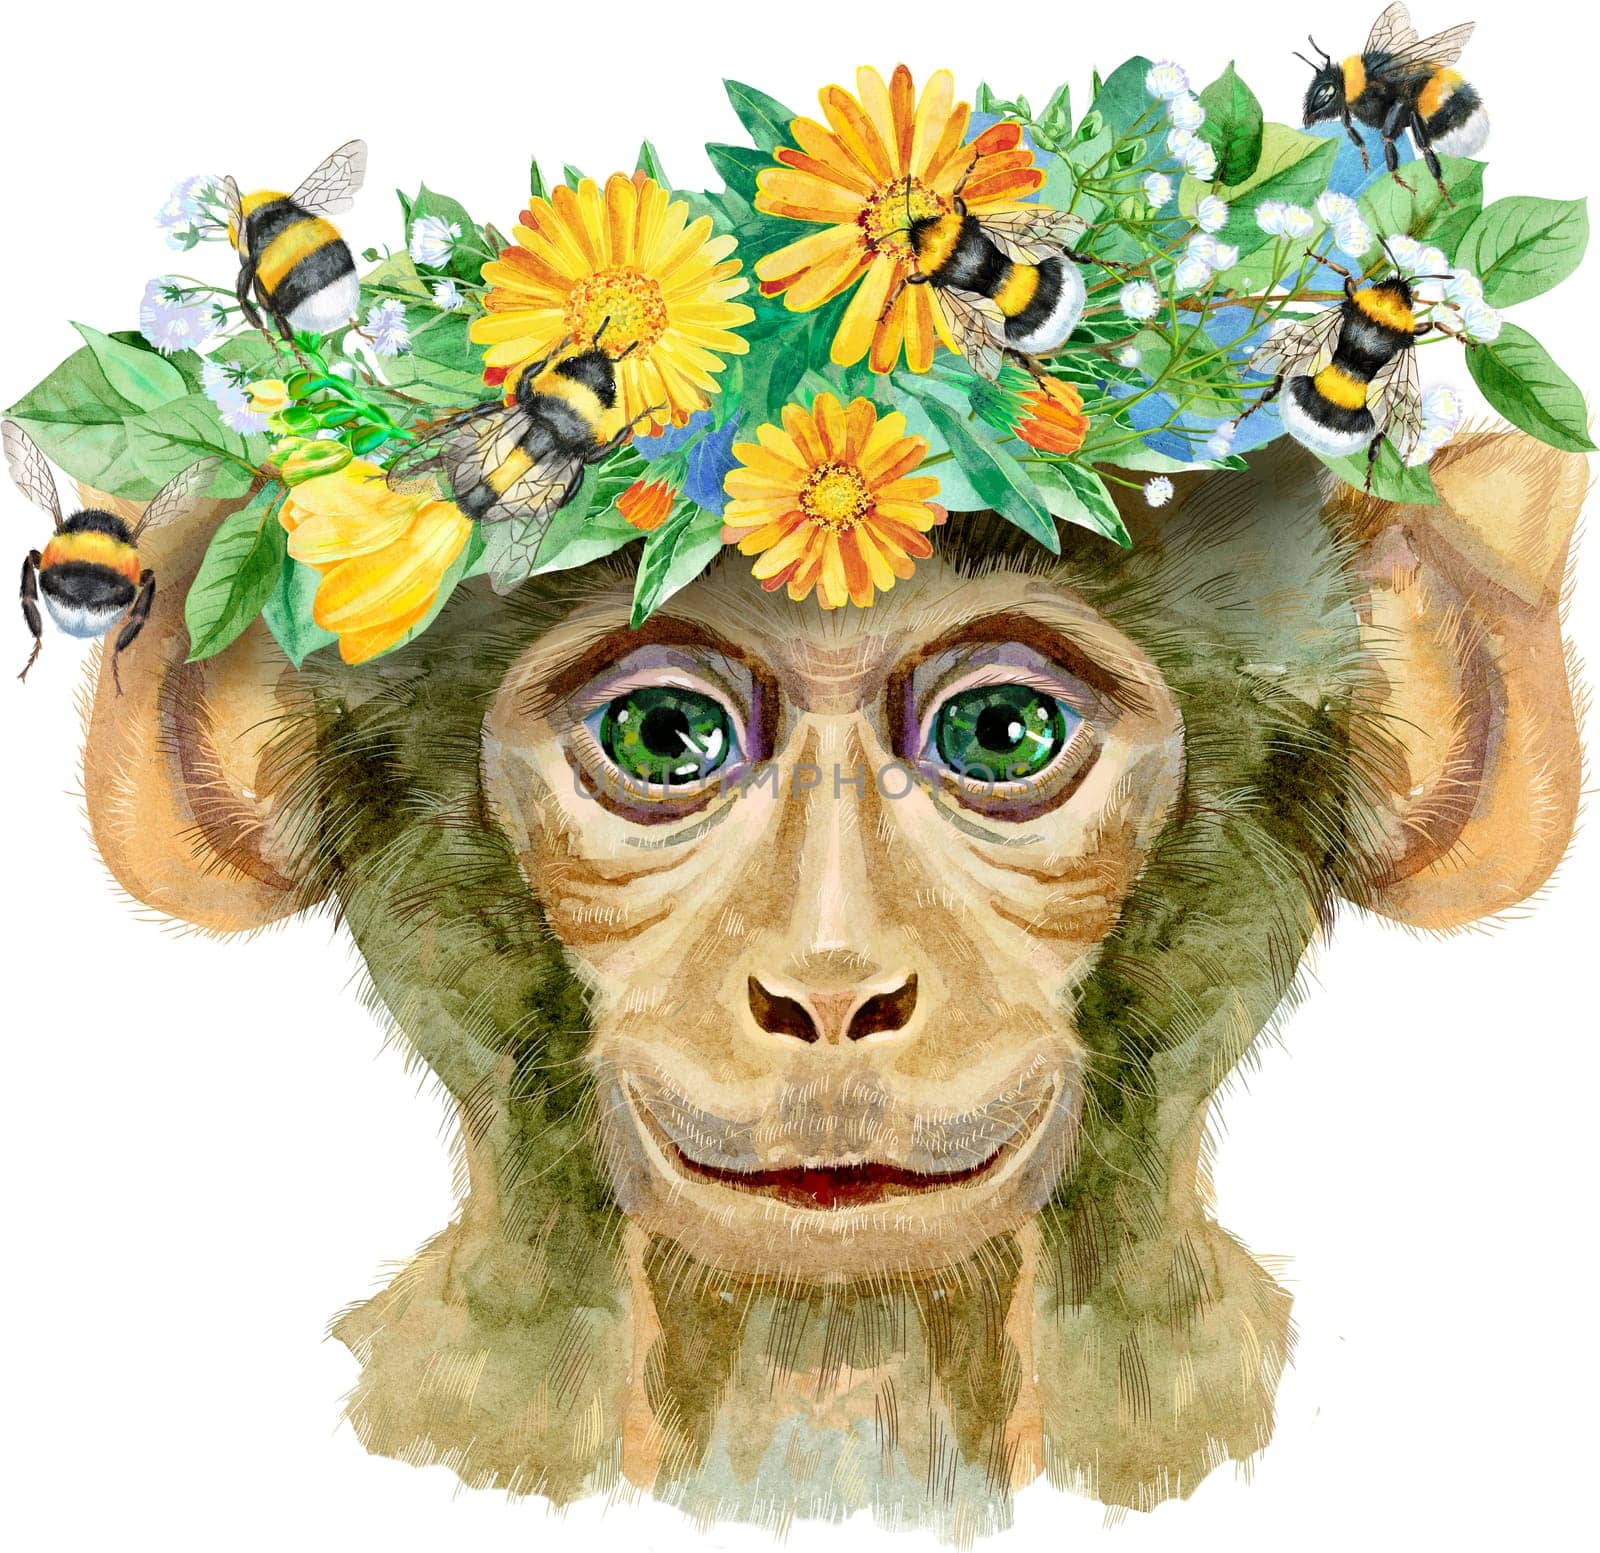 Portrait of a monkey in a wreath of flowers with bumblebees by NataOmsk